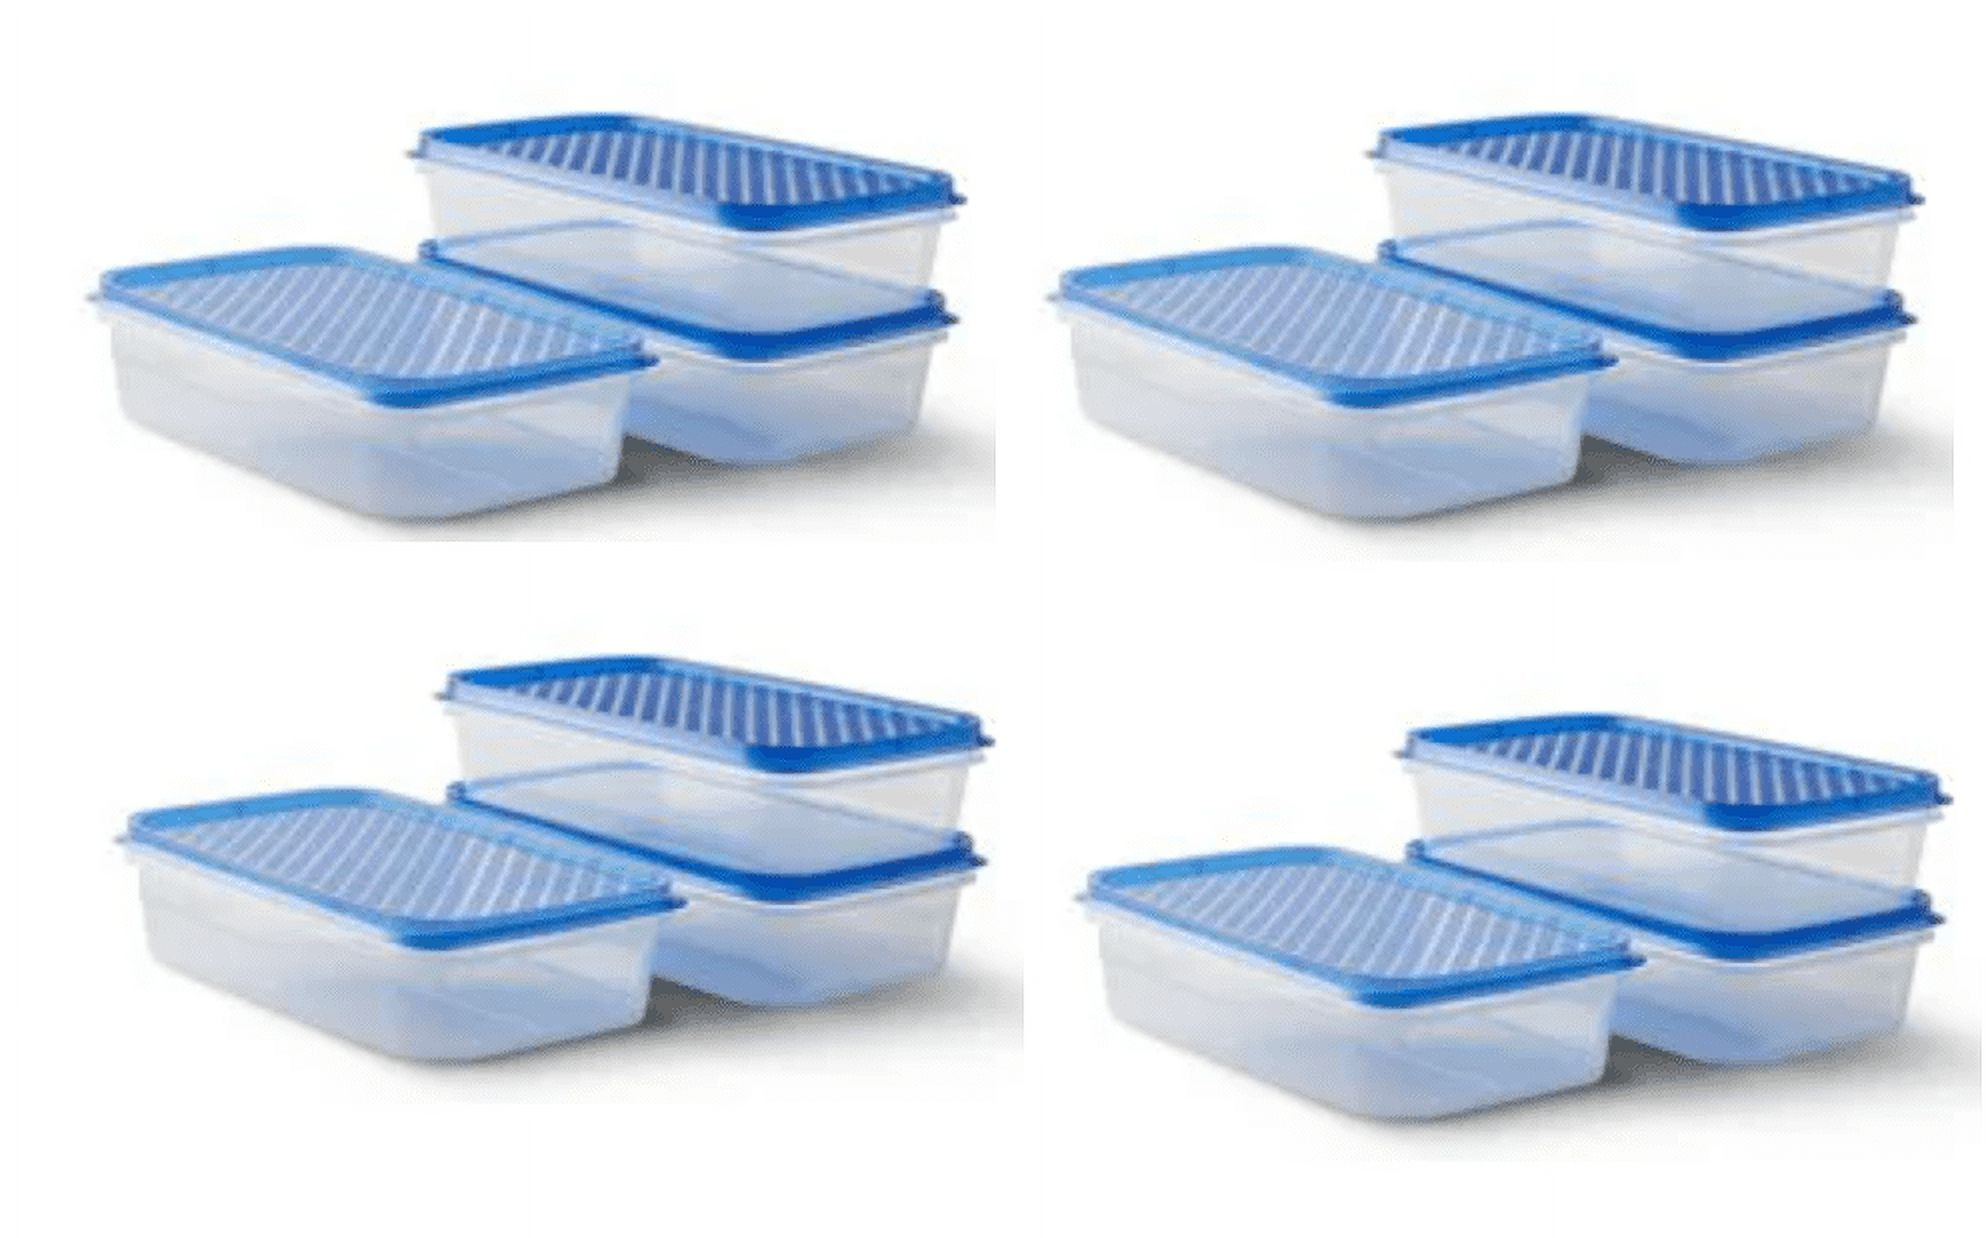 Mainstays 6 Cup Food Storage Plastic Container with Lid, 3 Pack